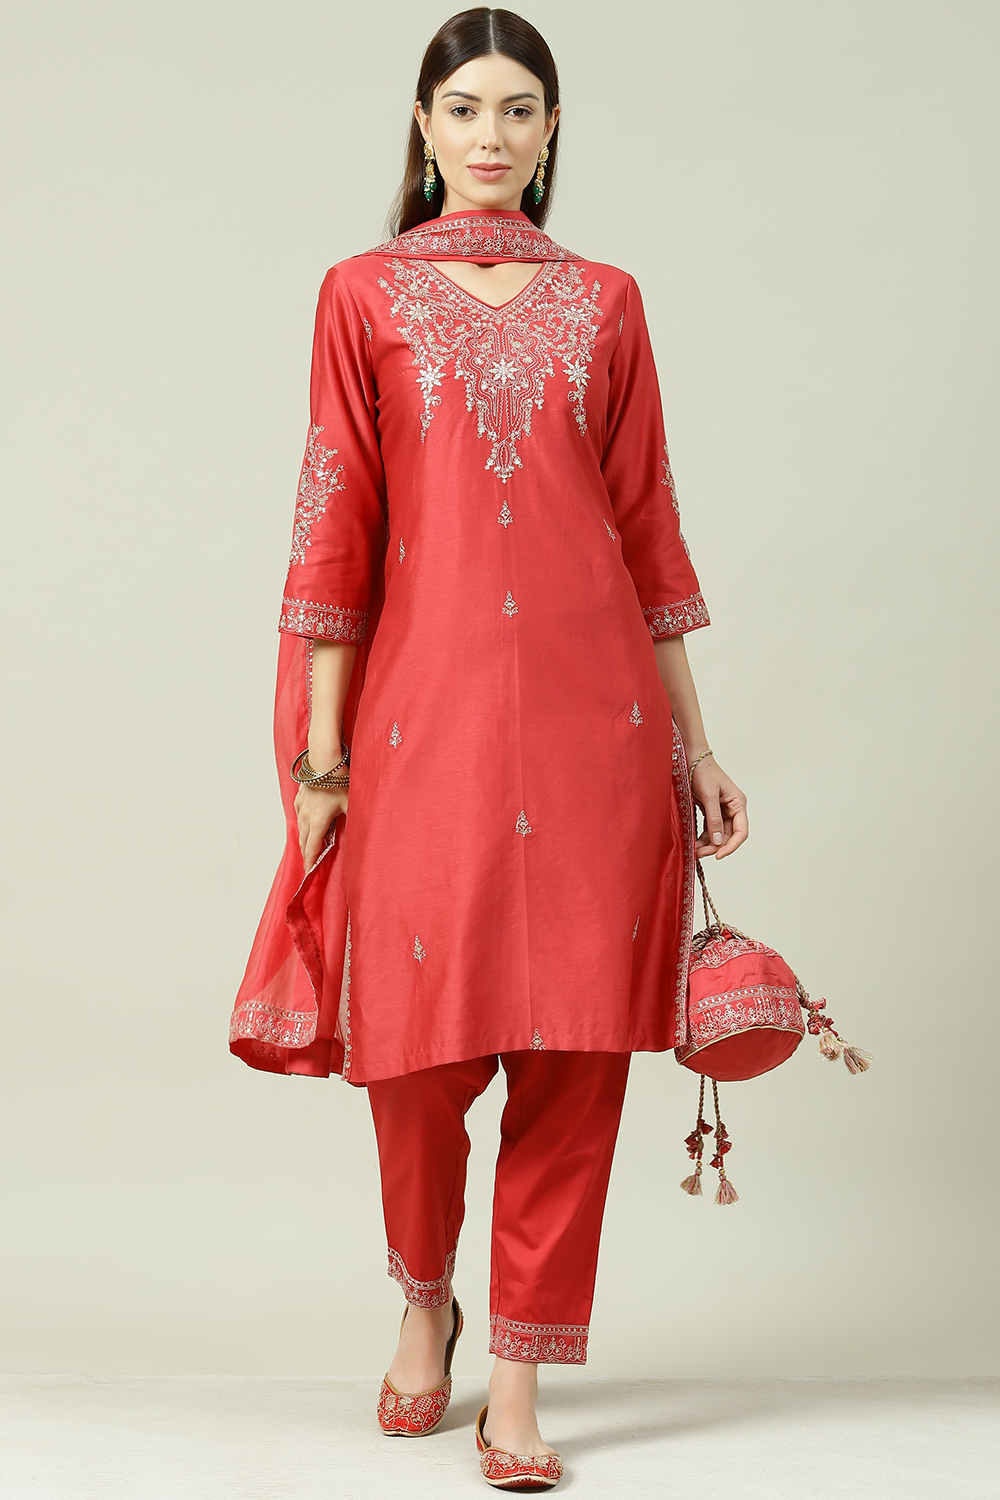 Buy online Red Art Silk Straight Suit Set for women at best price ...